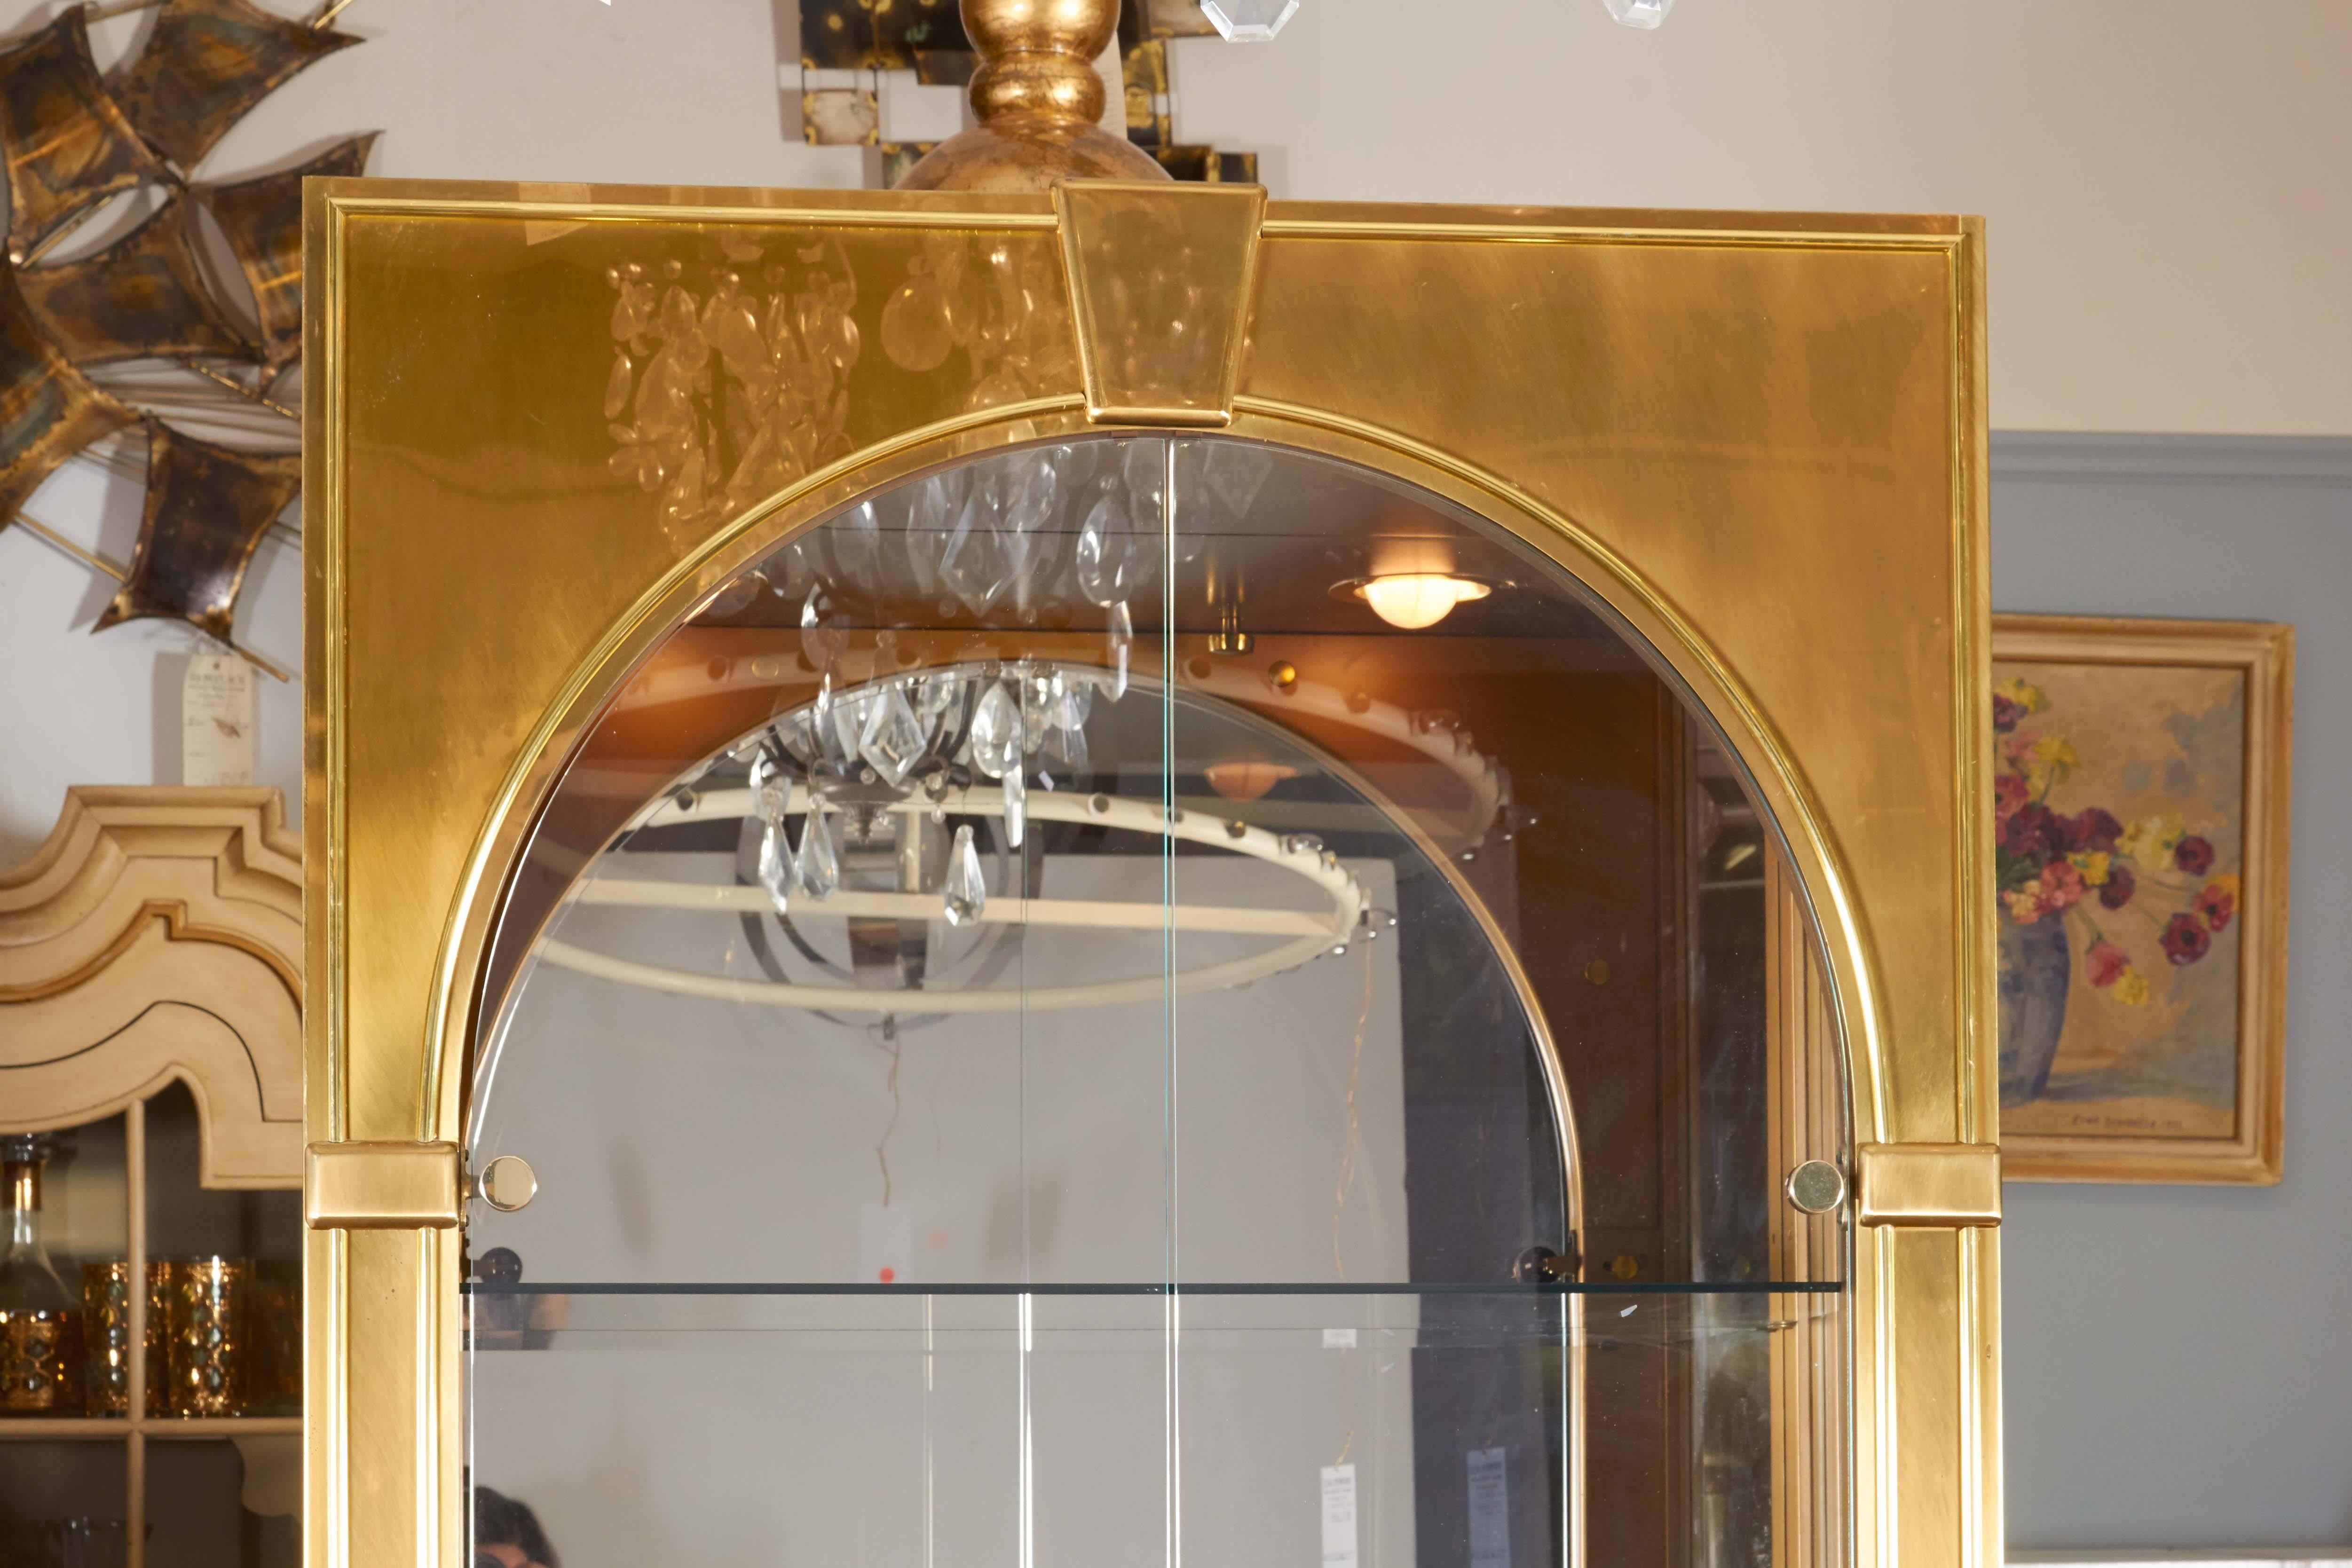 A pair of impressive vitrines in the classical Palladian style, manufactured by Mastercraft, circa 1970s, each with glass windows against brass frames, including two-door arched front, the interior with three glass shelves, above lower two-door